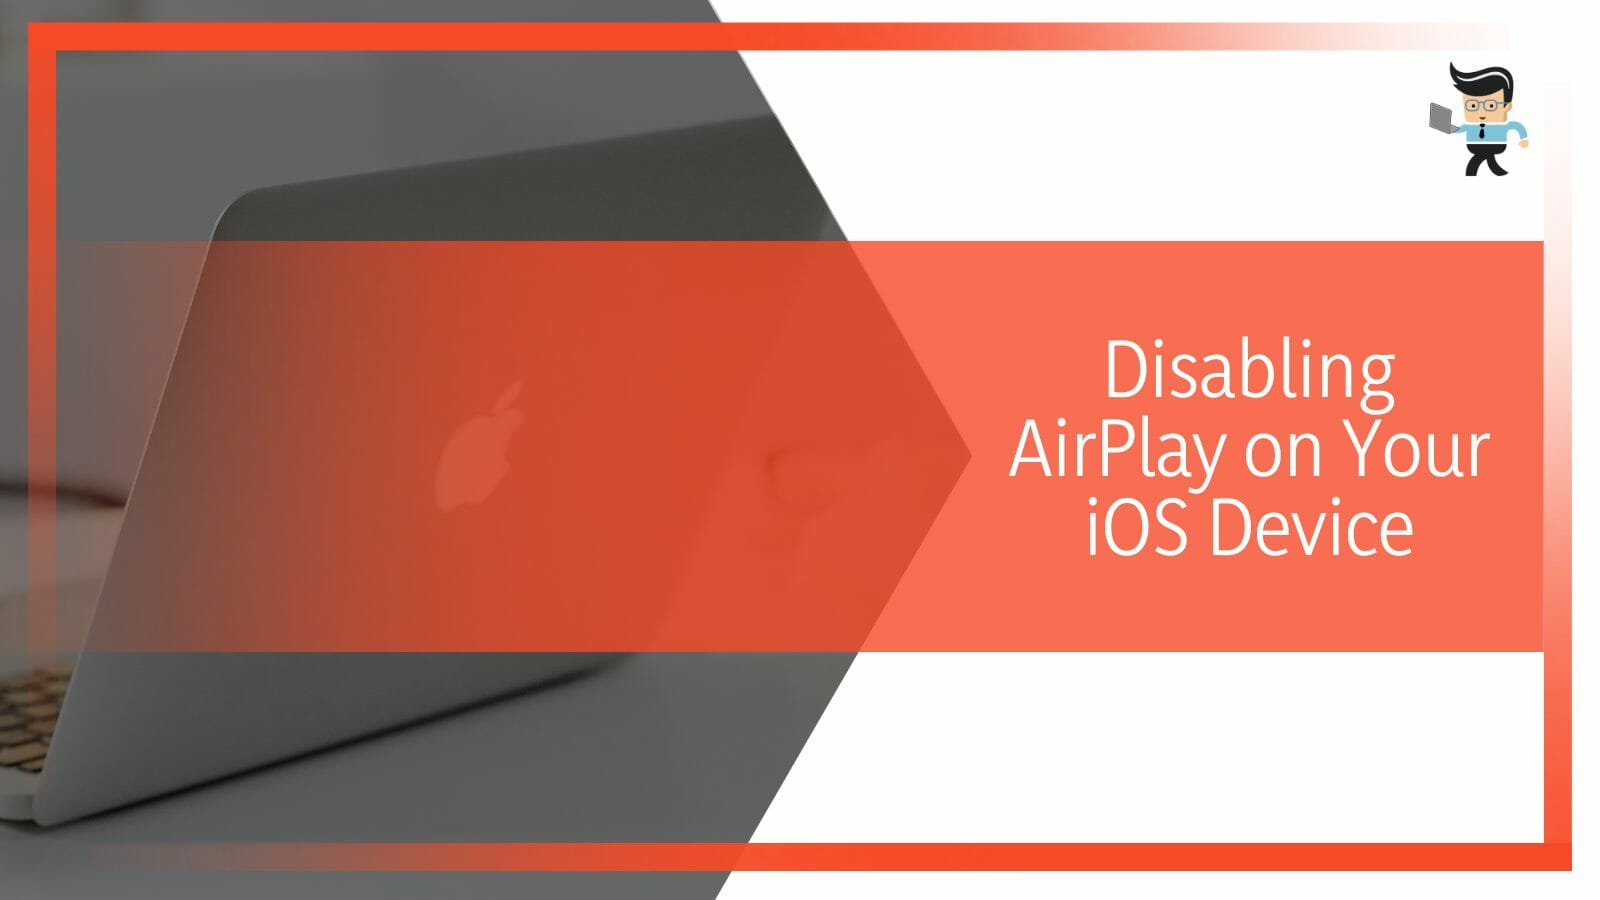 Disabling AirPlay on Your iOS Device